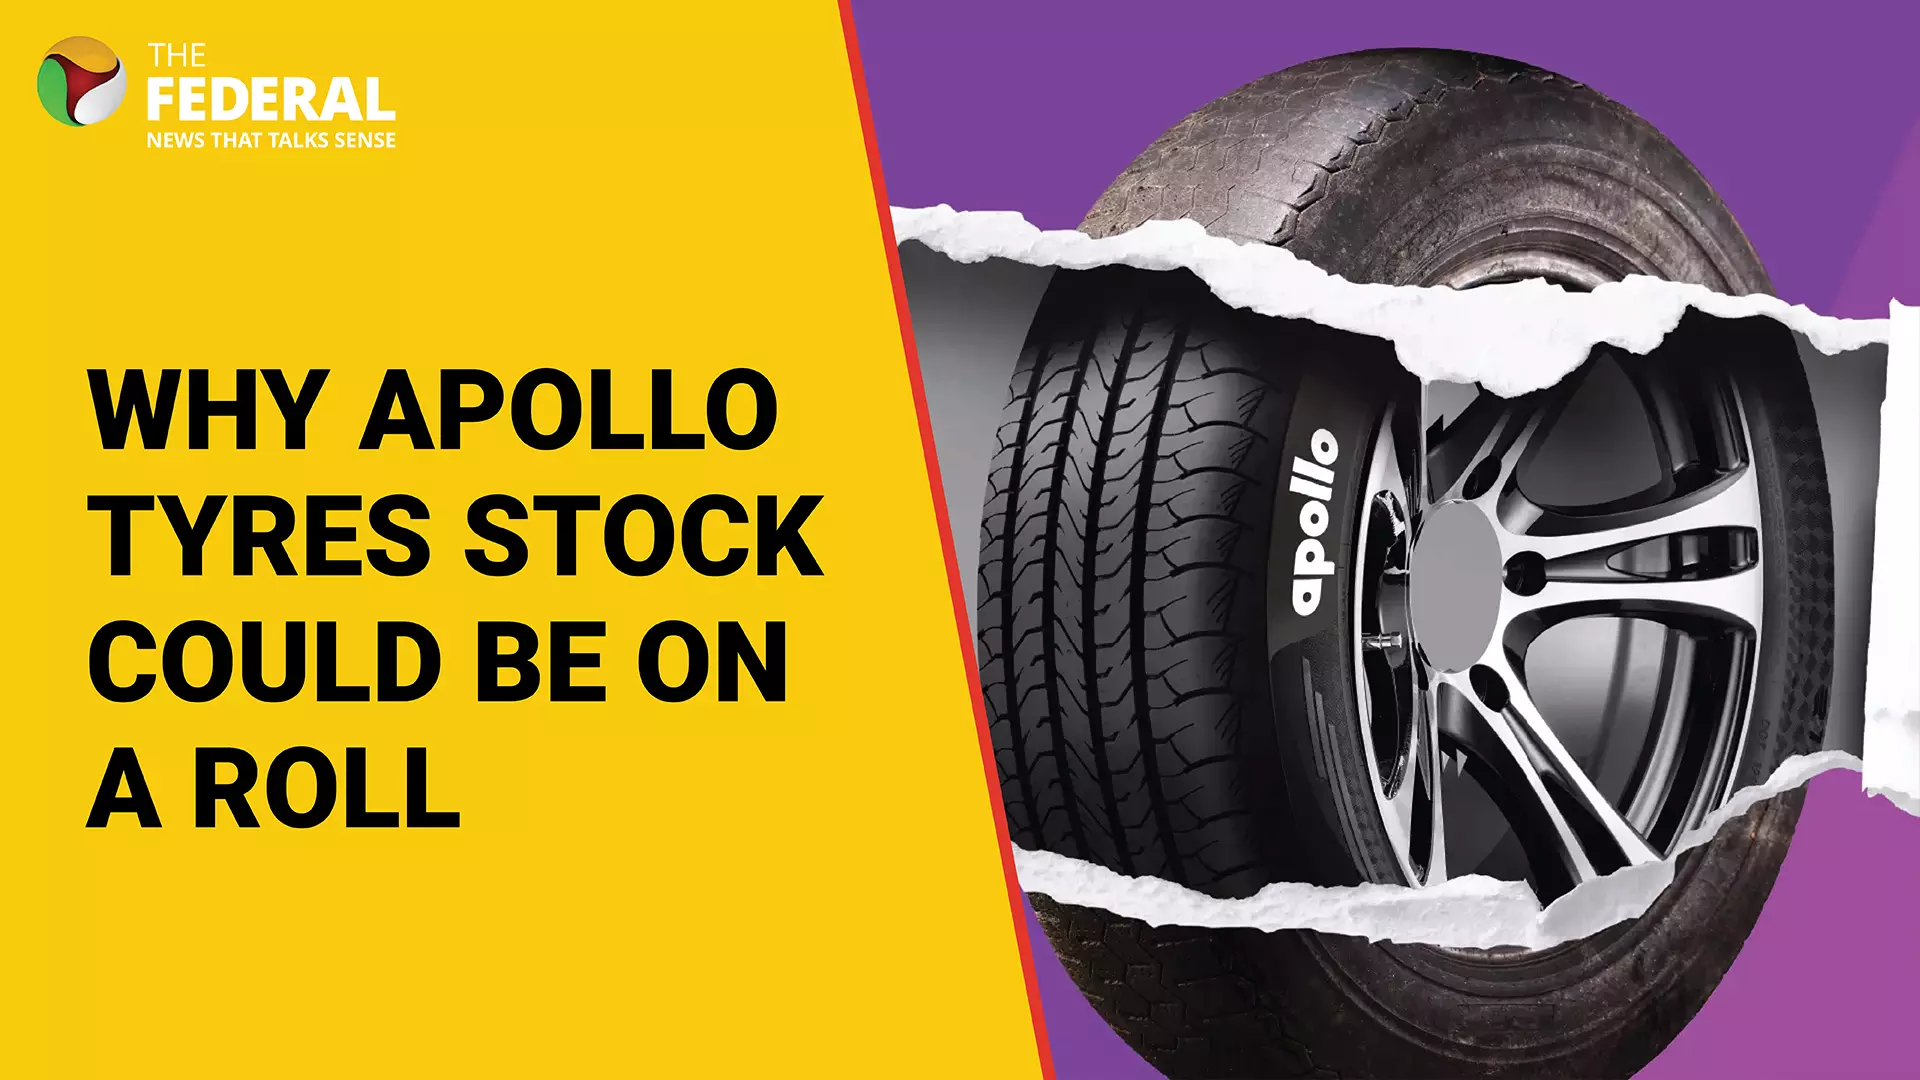 Why Apollo Tyres stock could be on a roll